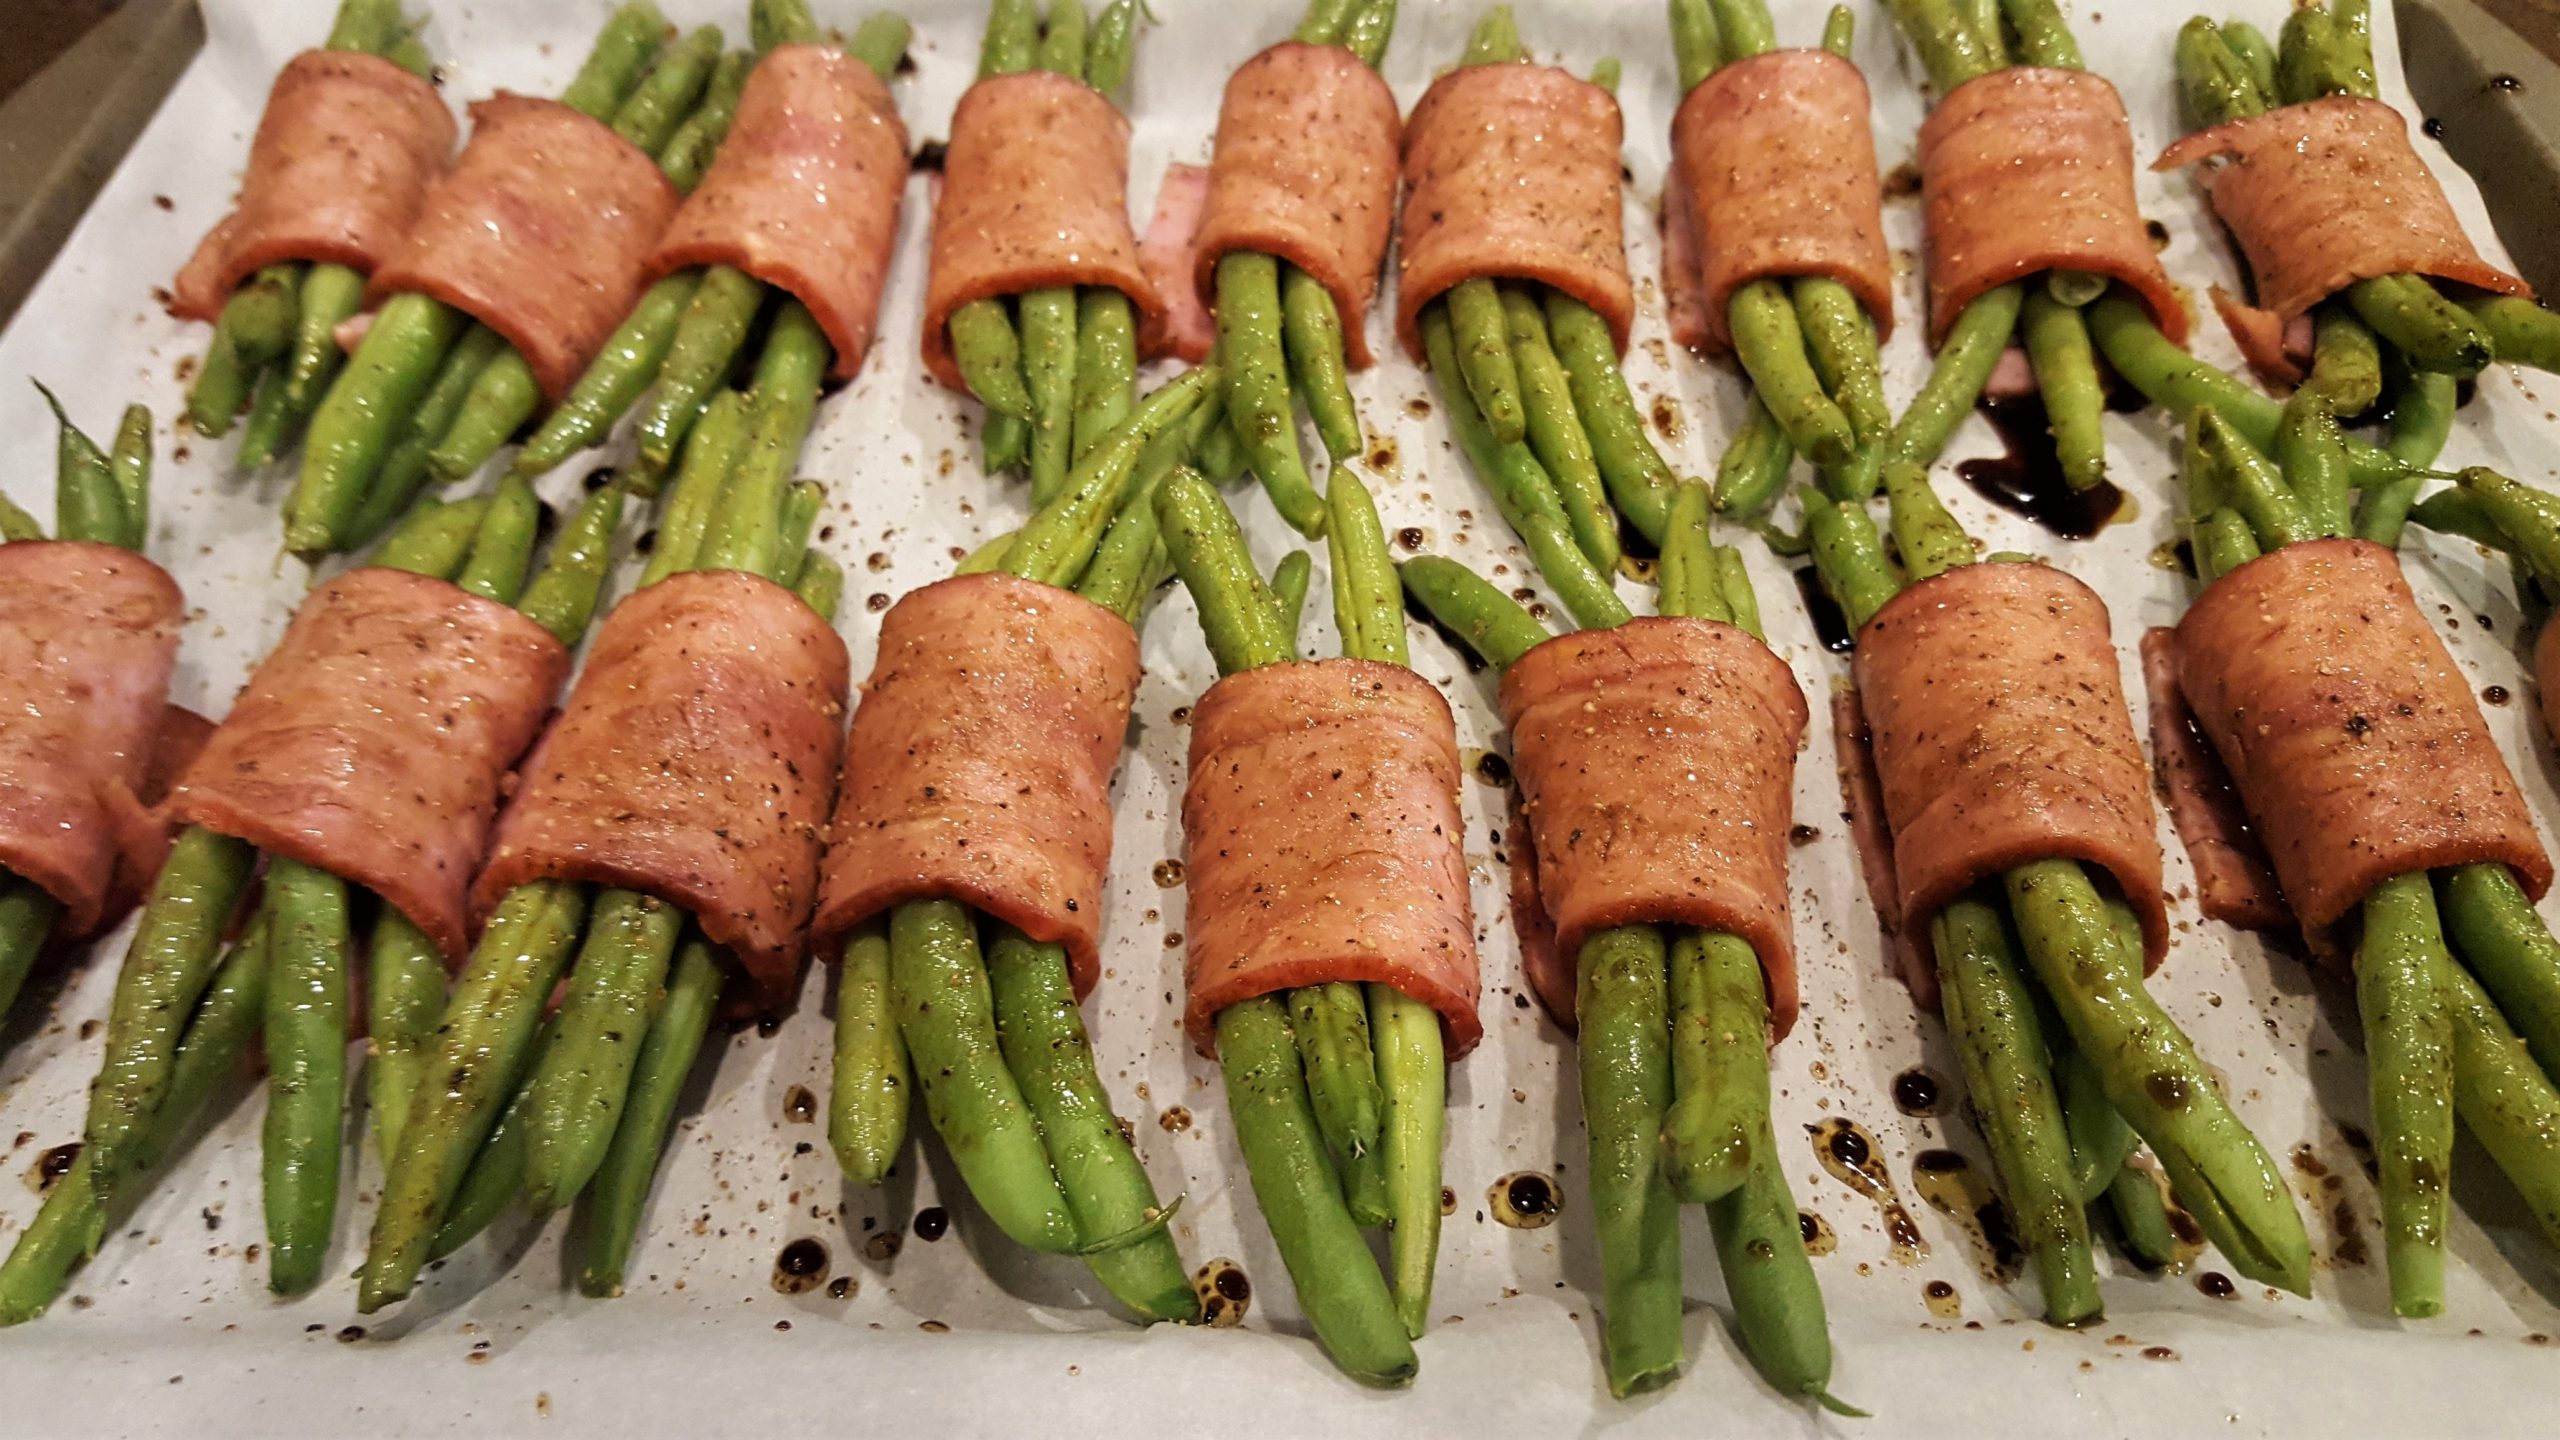 Bacon Wrapped Balsamic Green Beans before roasting - Dining in with Danielle